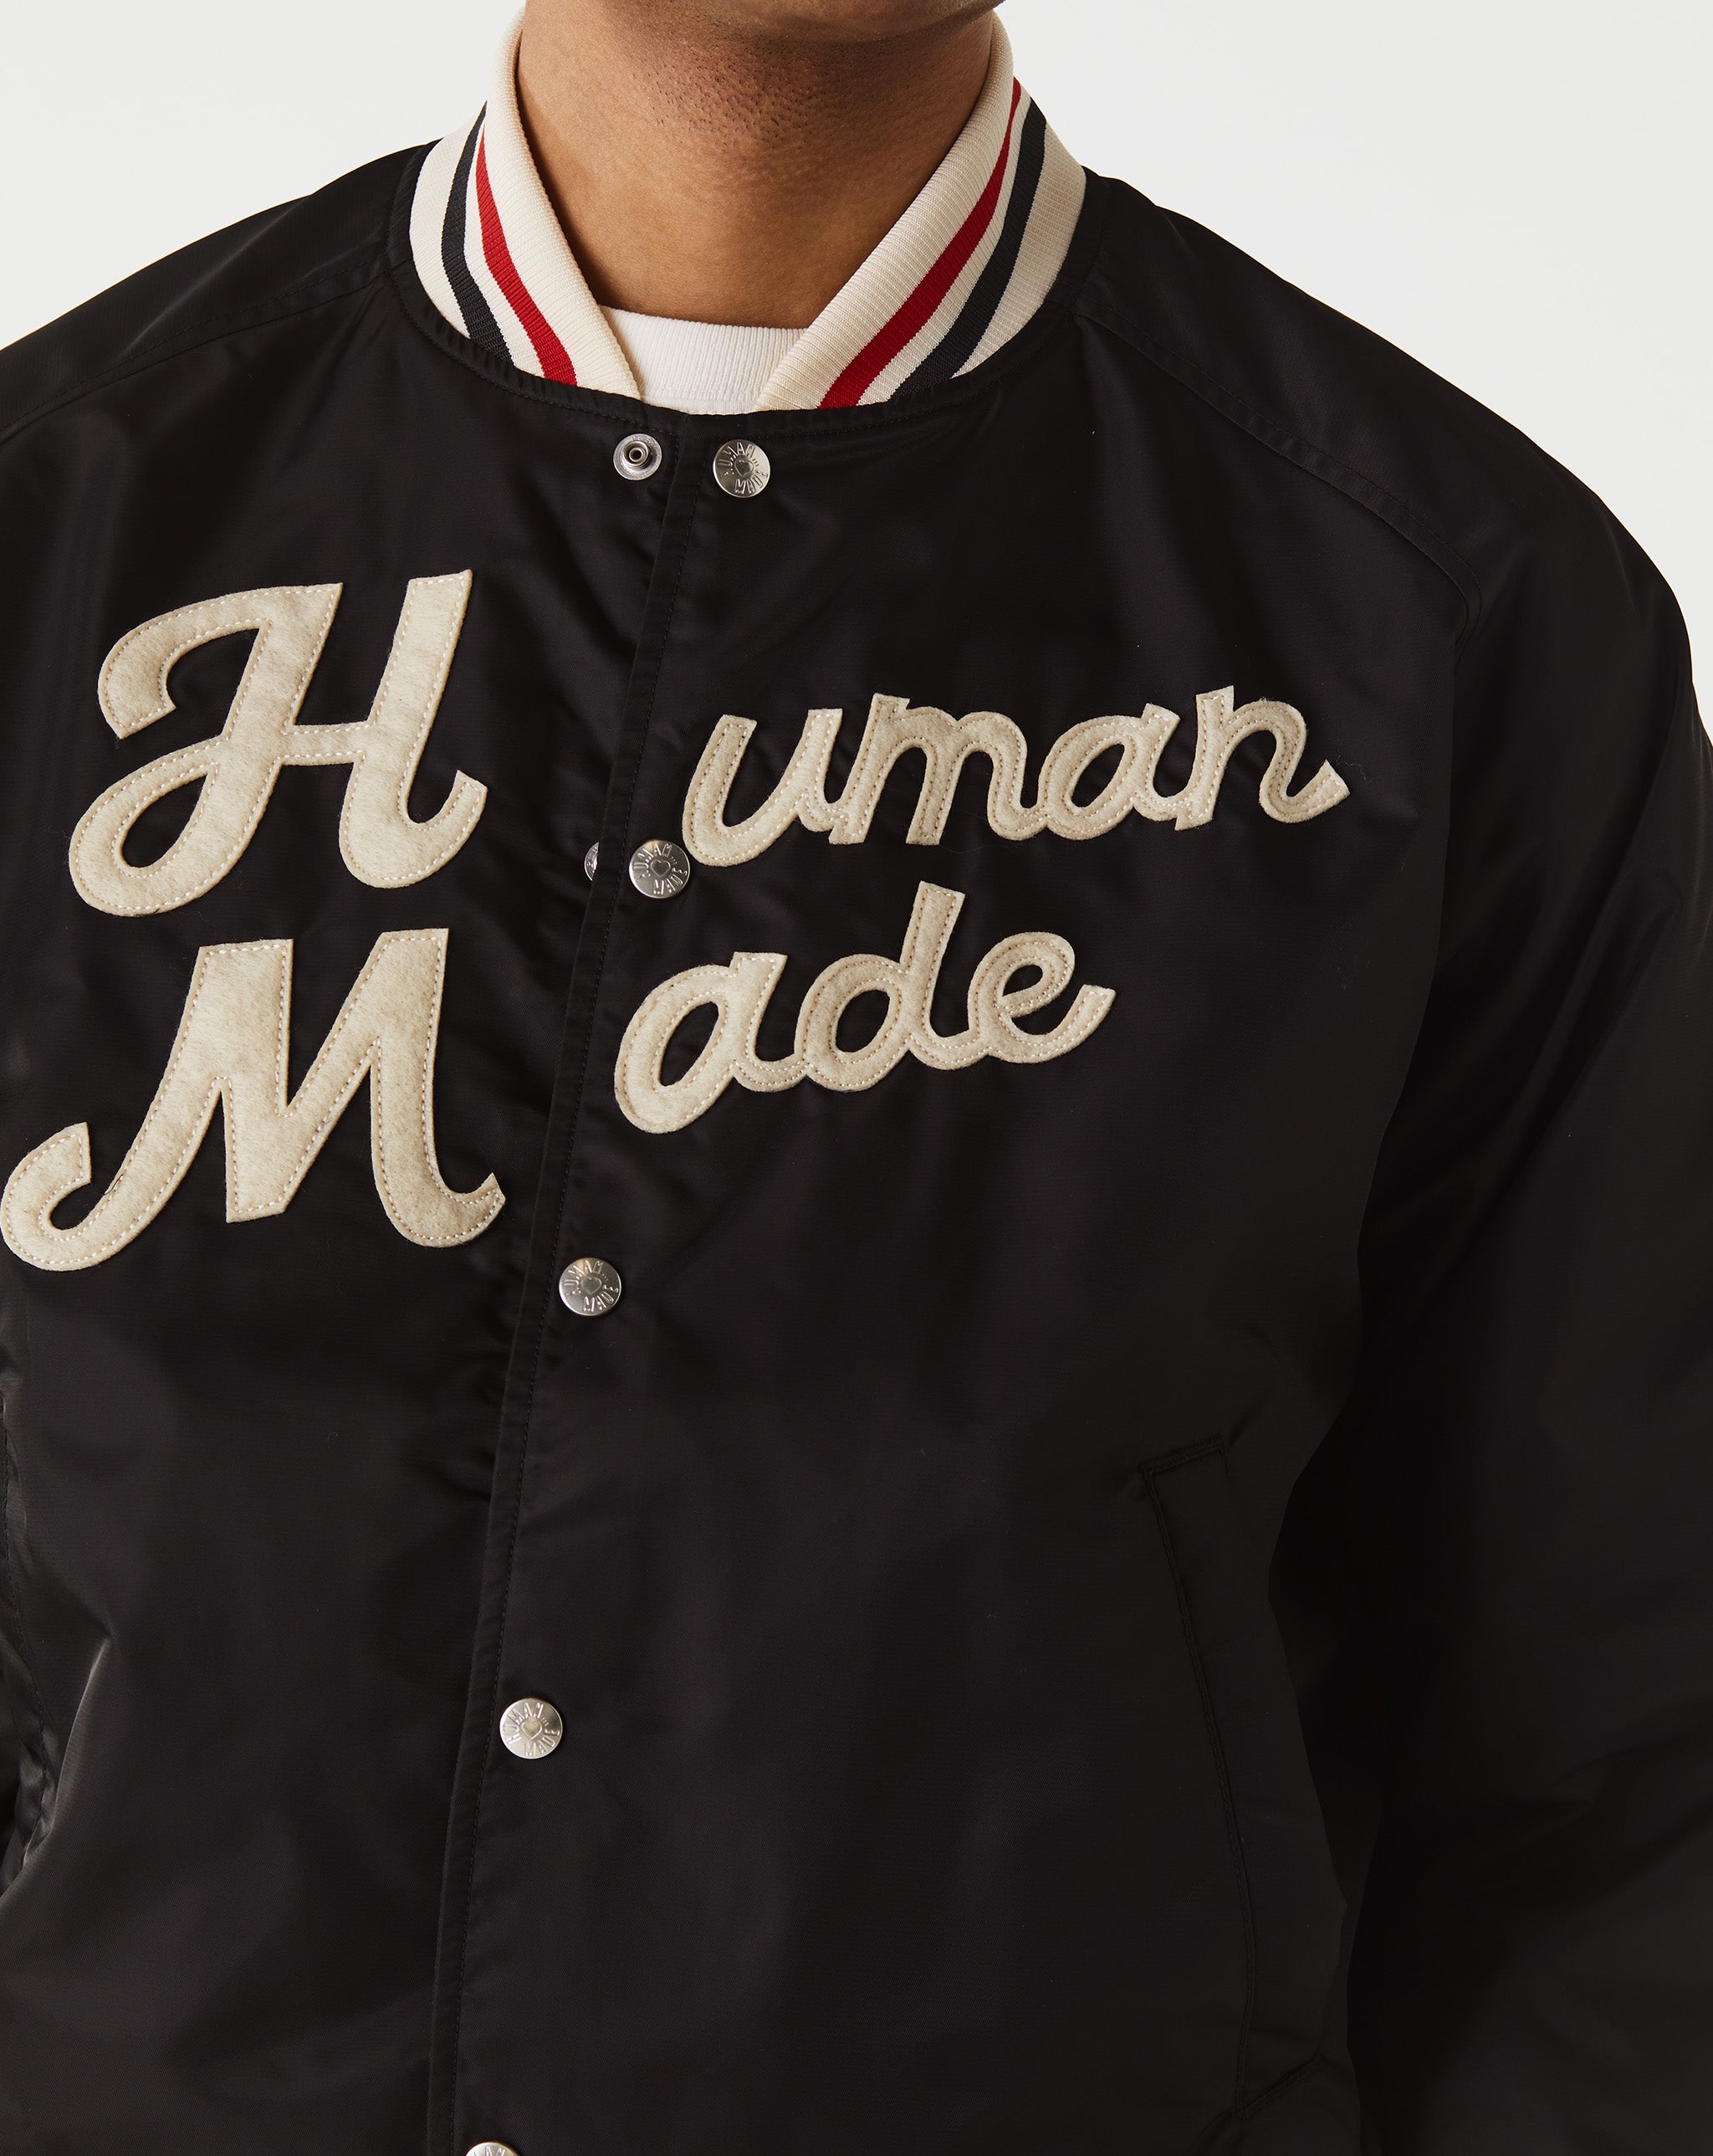 Human Made Embroidered Nike logos on front and back  - Cheap 127-0 Jordan outlet